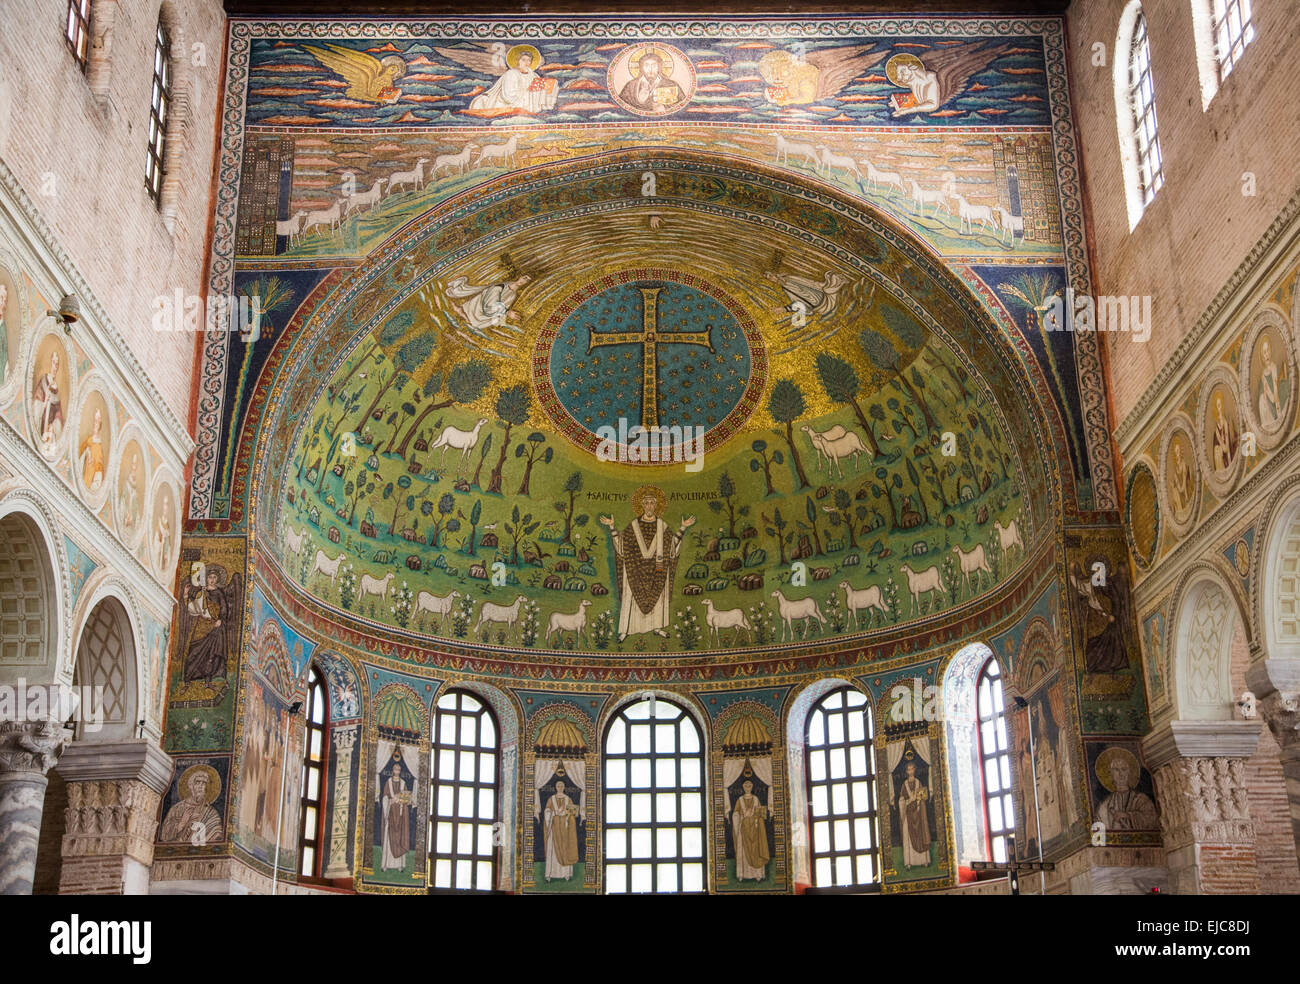 apse mosaics of Basilica of Sant'Apollinare in Classe, Italy Stock Photo